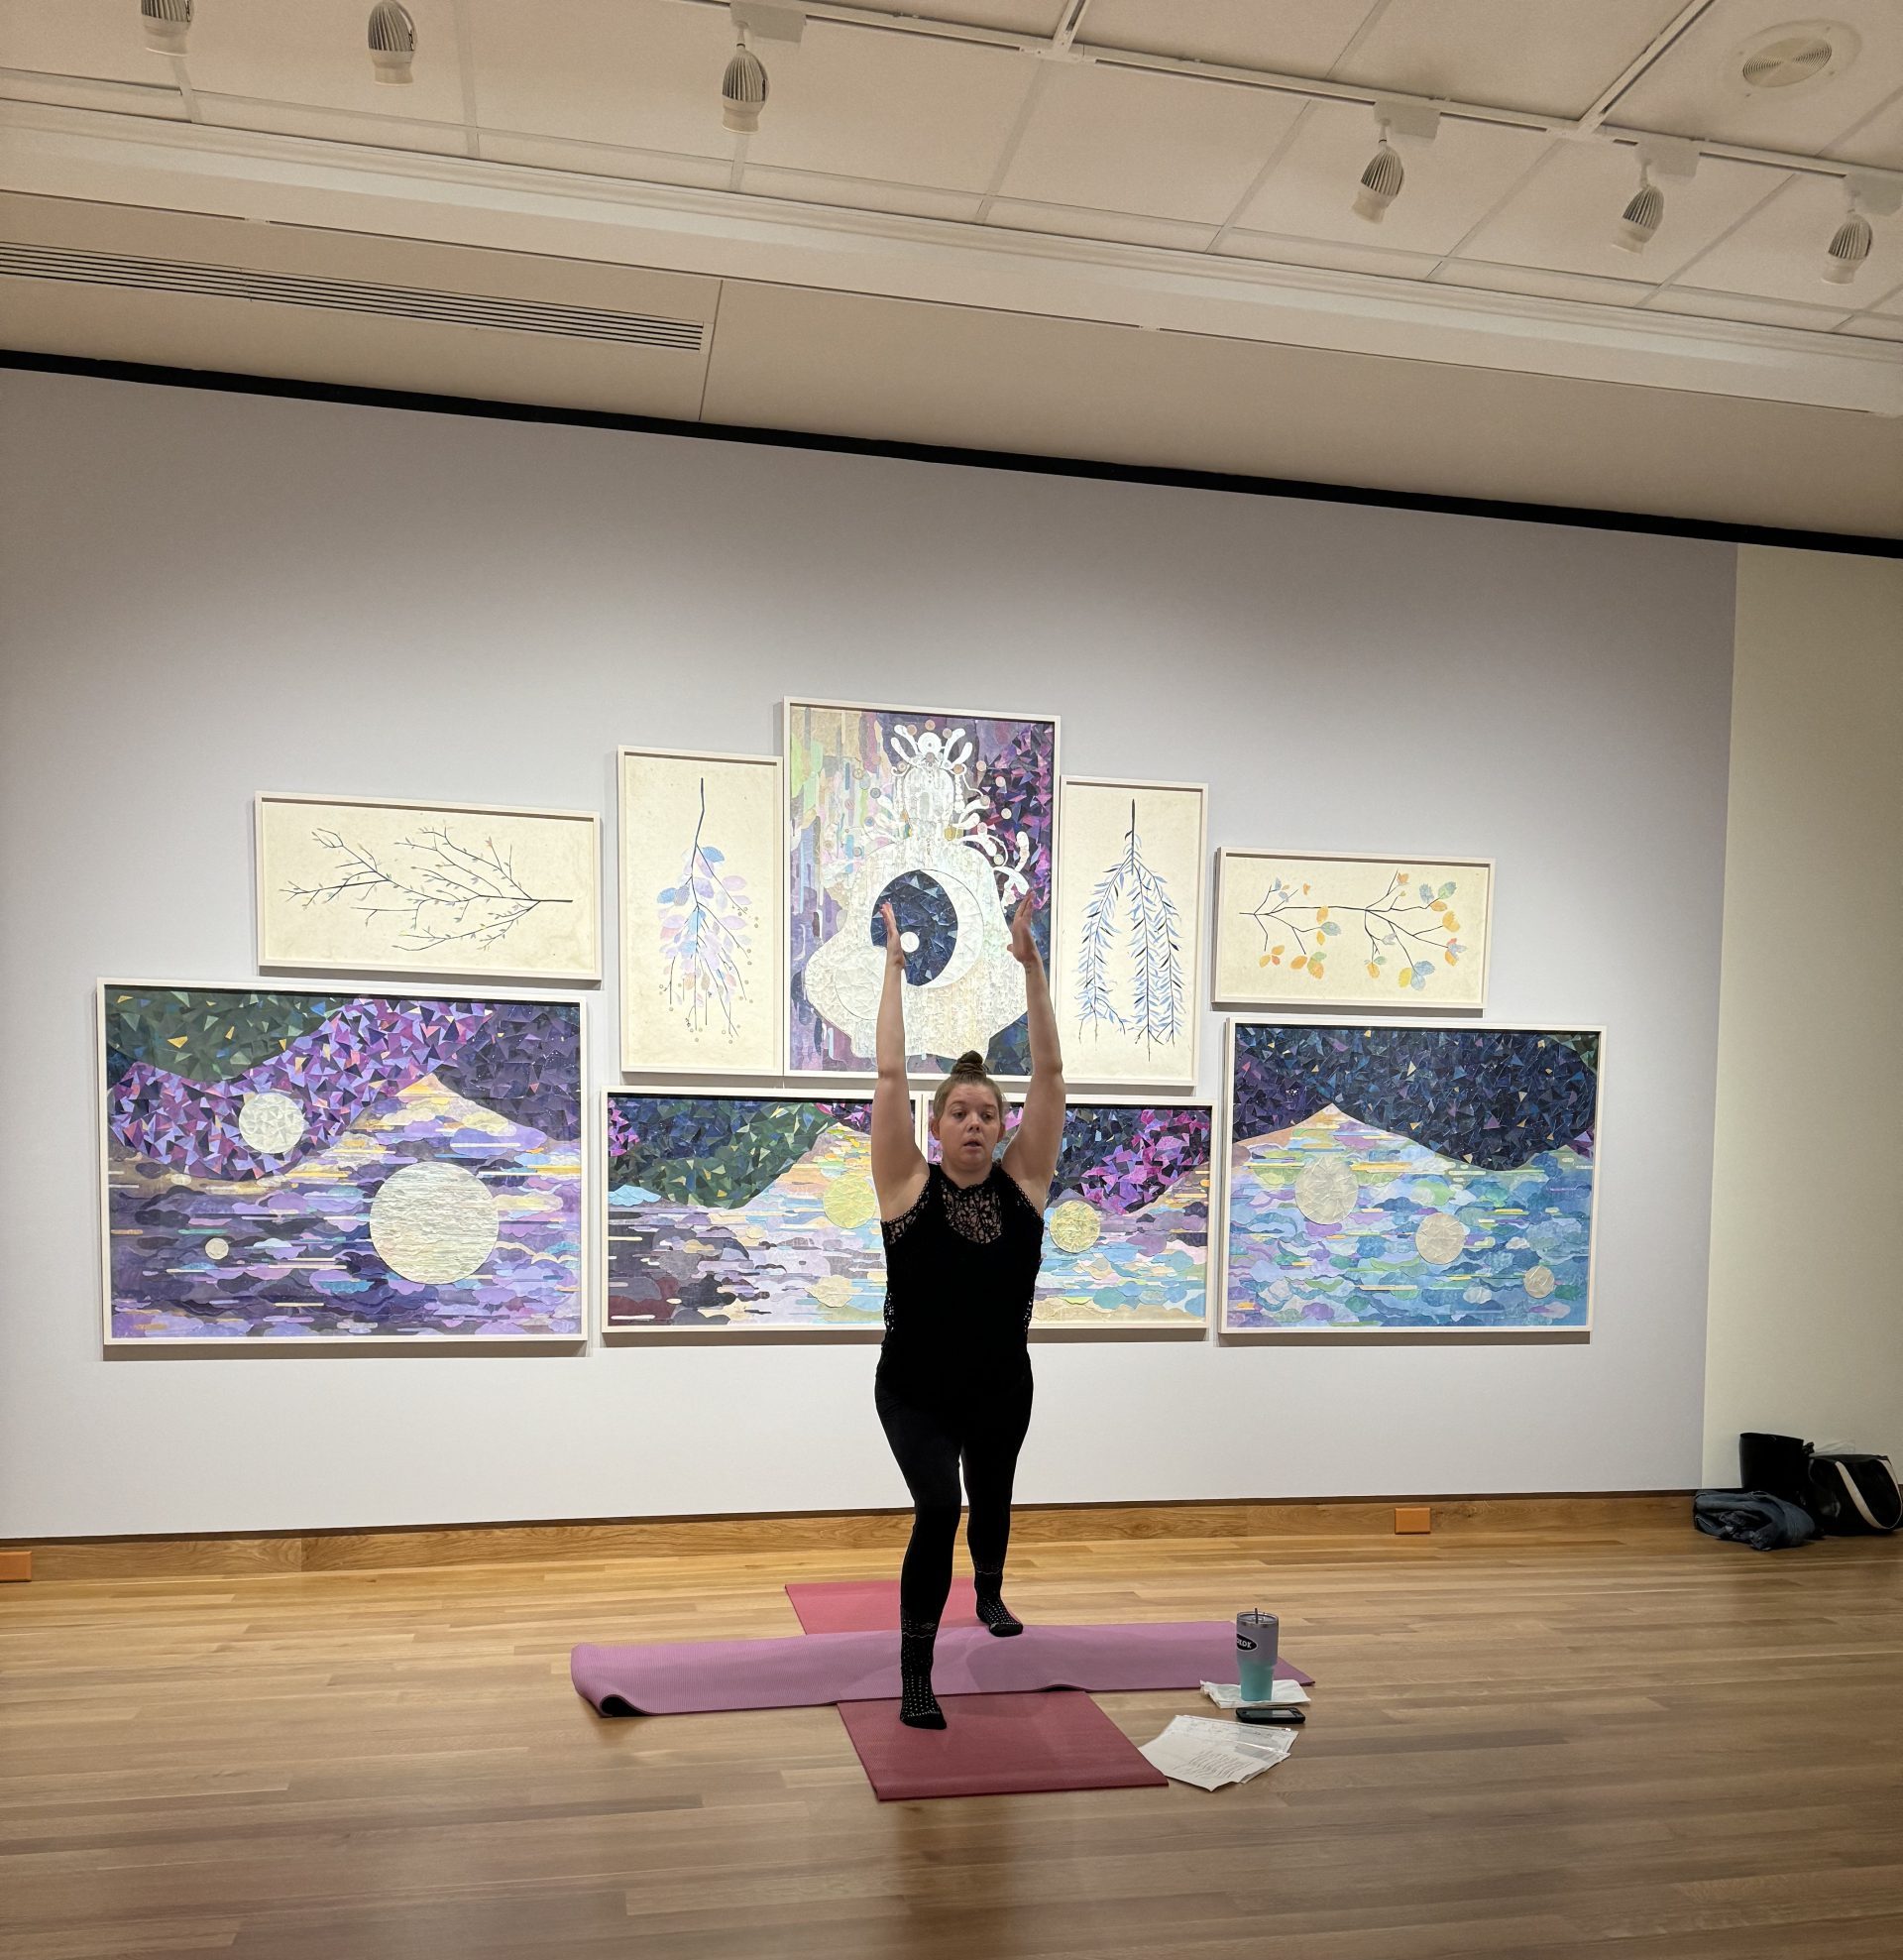 A photo of Karey, the yoga instructor, posing in a yoga position in front of artwork in the exhibition Women Reframe American Landscape